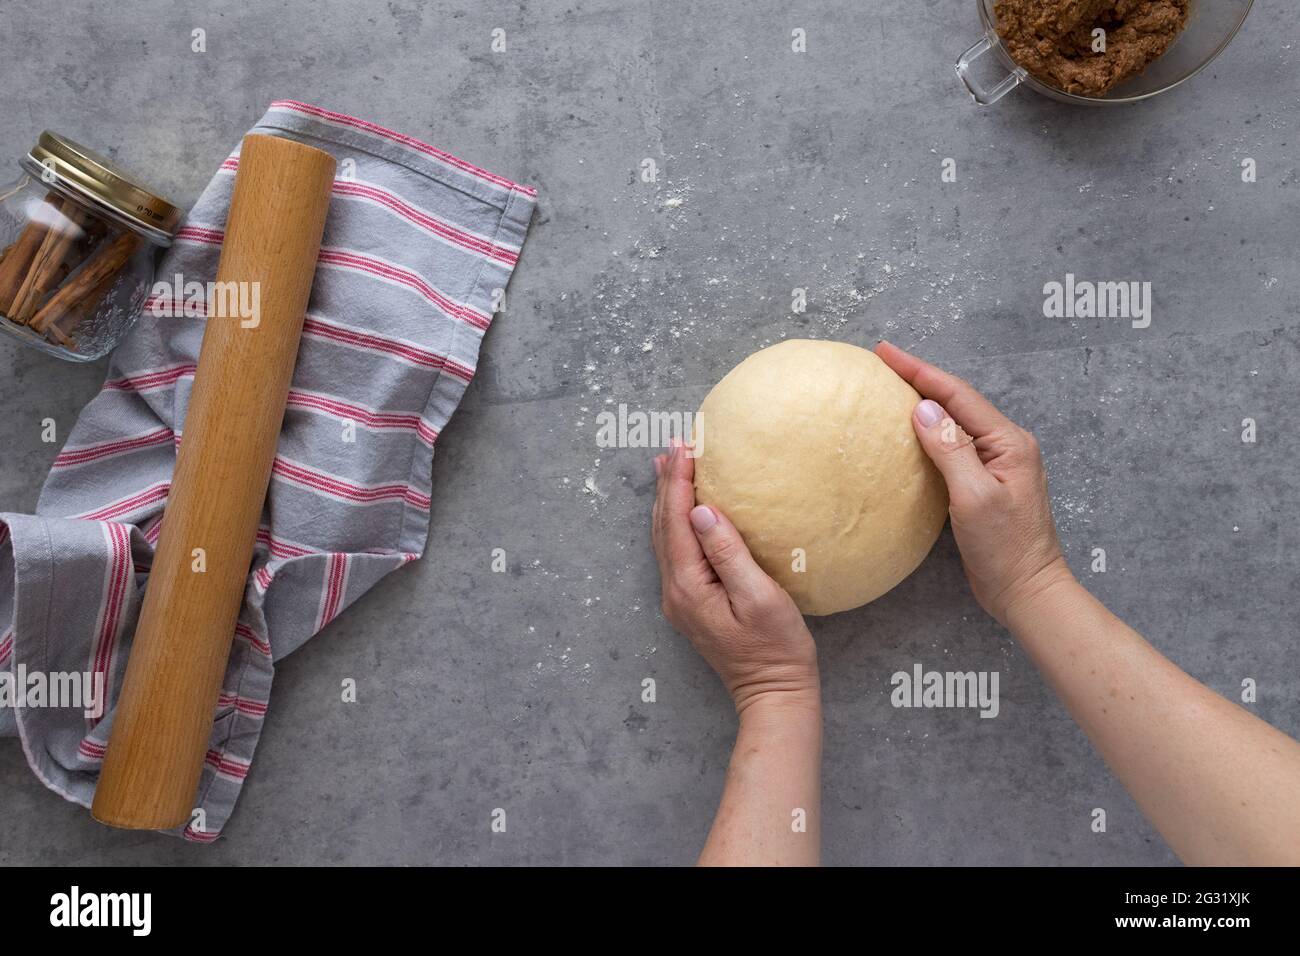 Woman hands handling a rounded dough on a grey rustic table with some flour powder sprinkled on it. Stock Photo